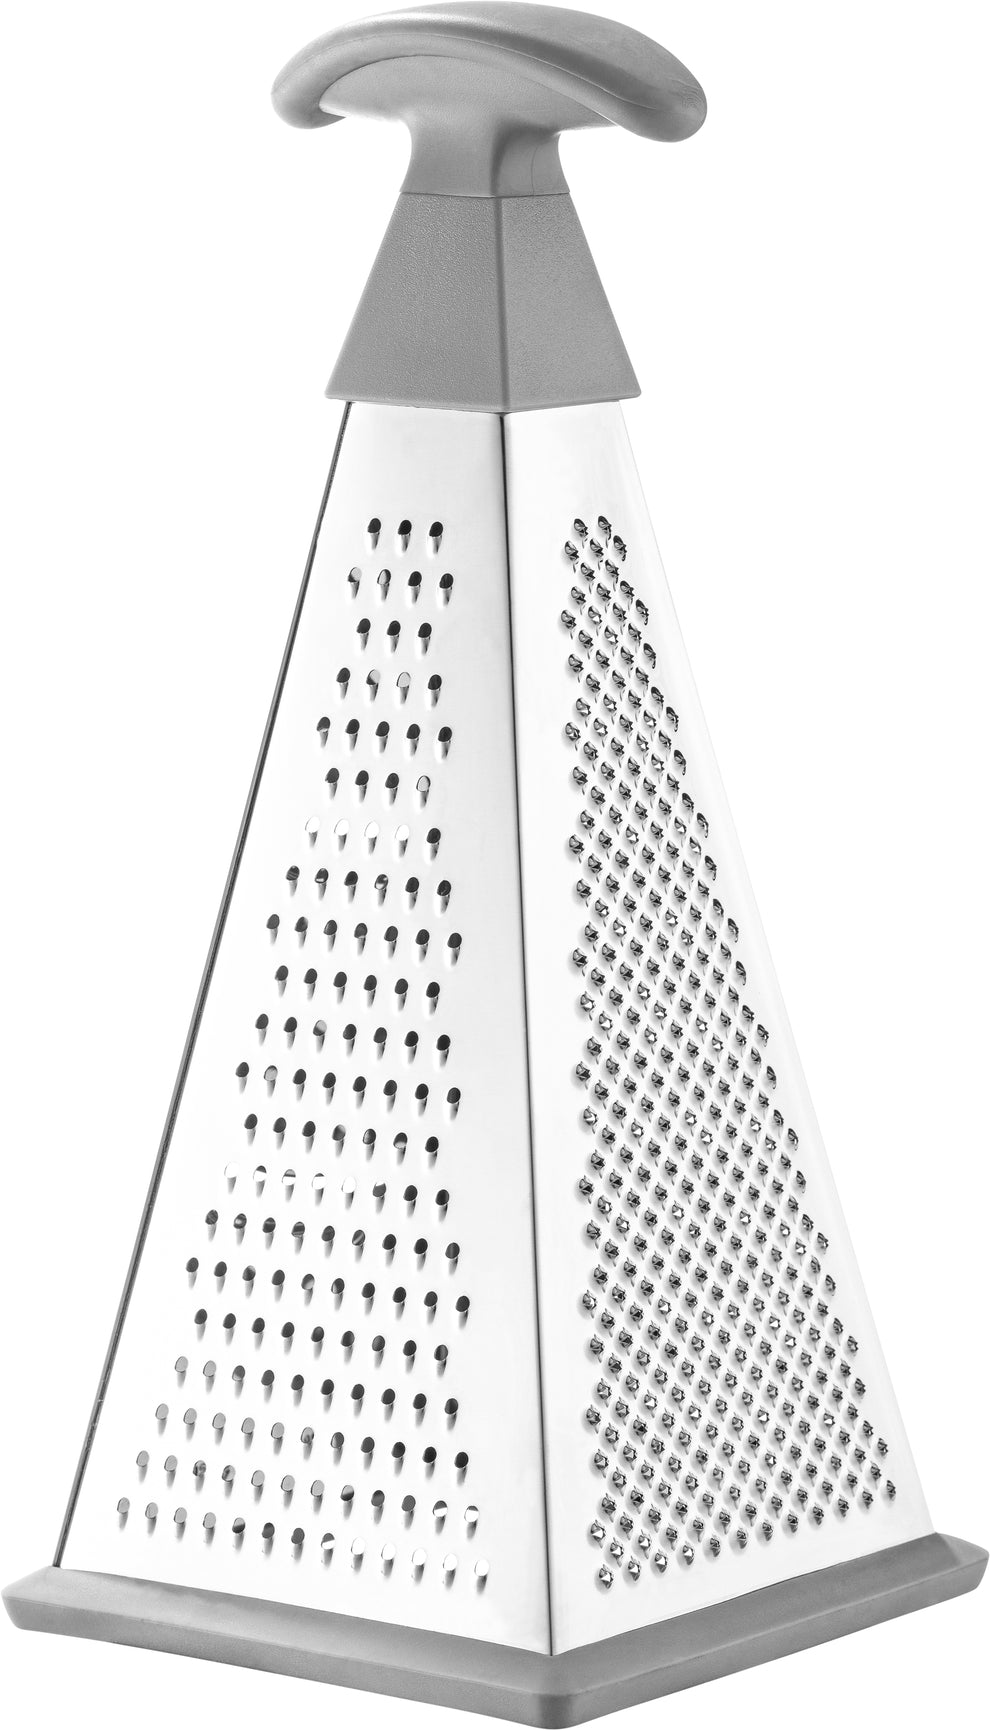 10 Stainless Steel 4 Sided Cone Grater with Silicone Non Skid Base and TPR Handles, Charcoal, 72 Pack